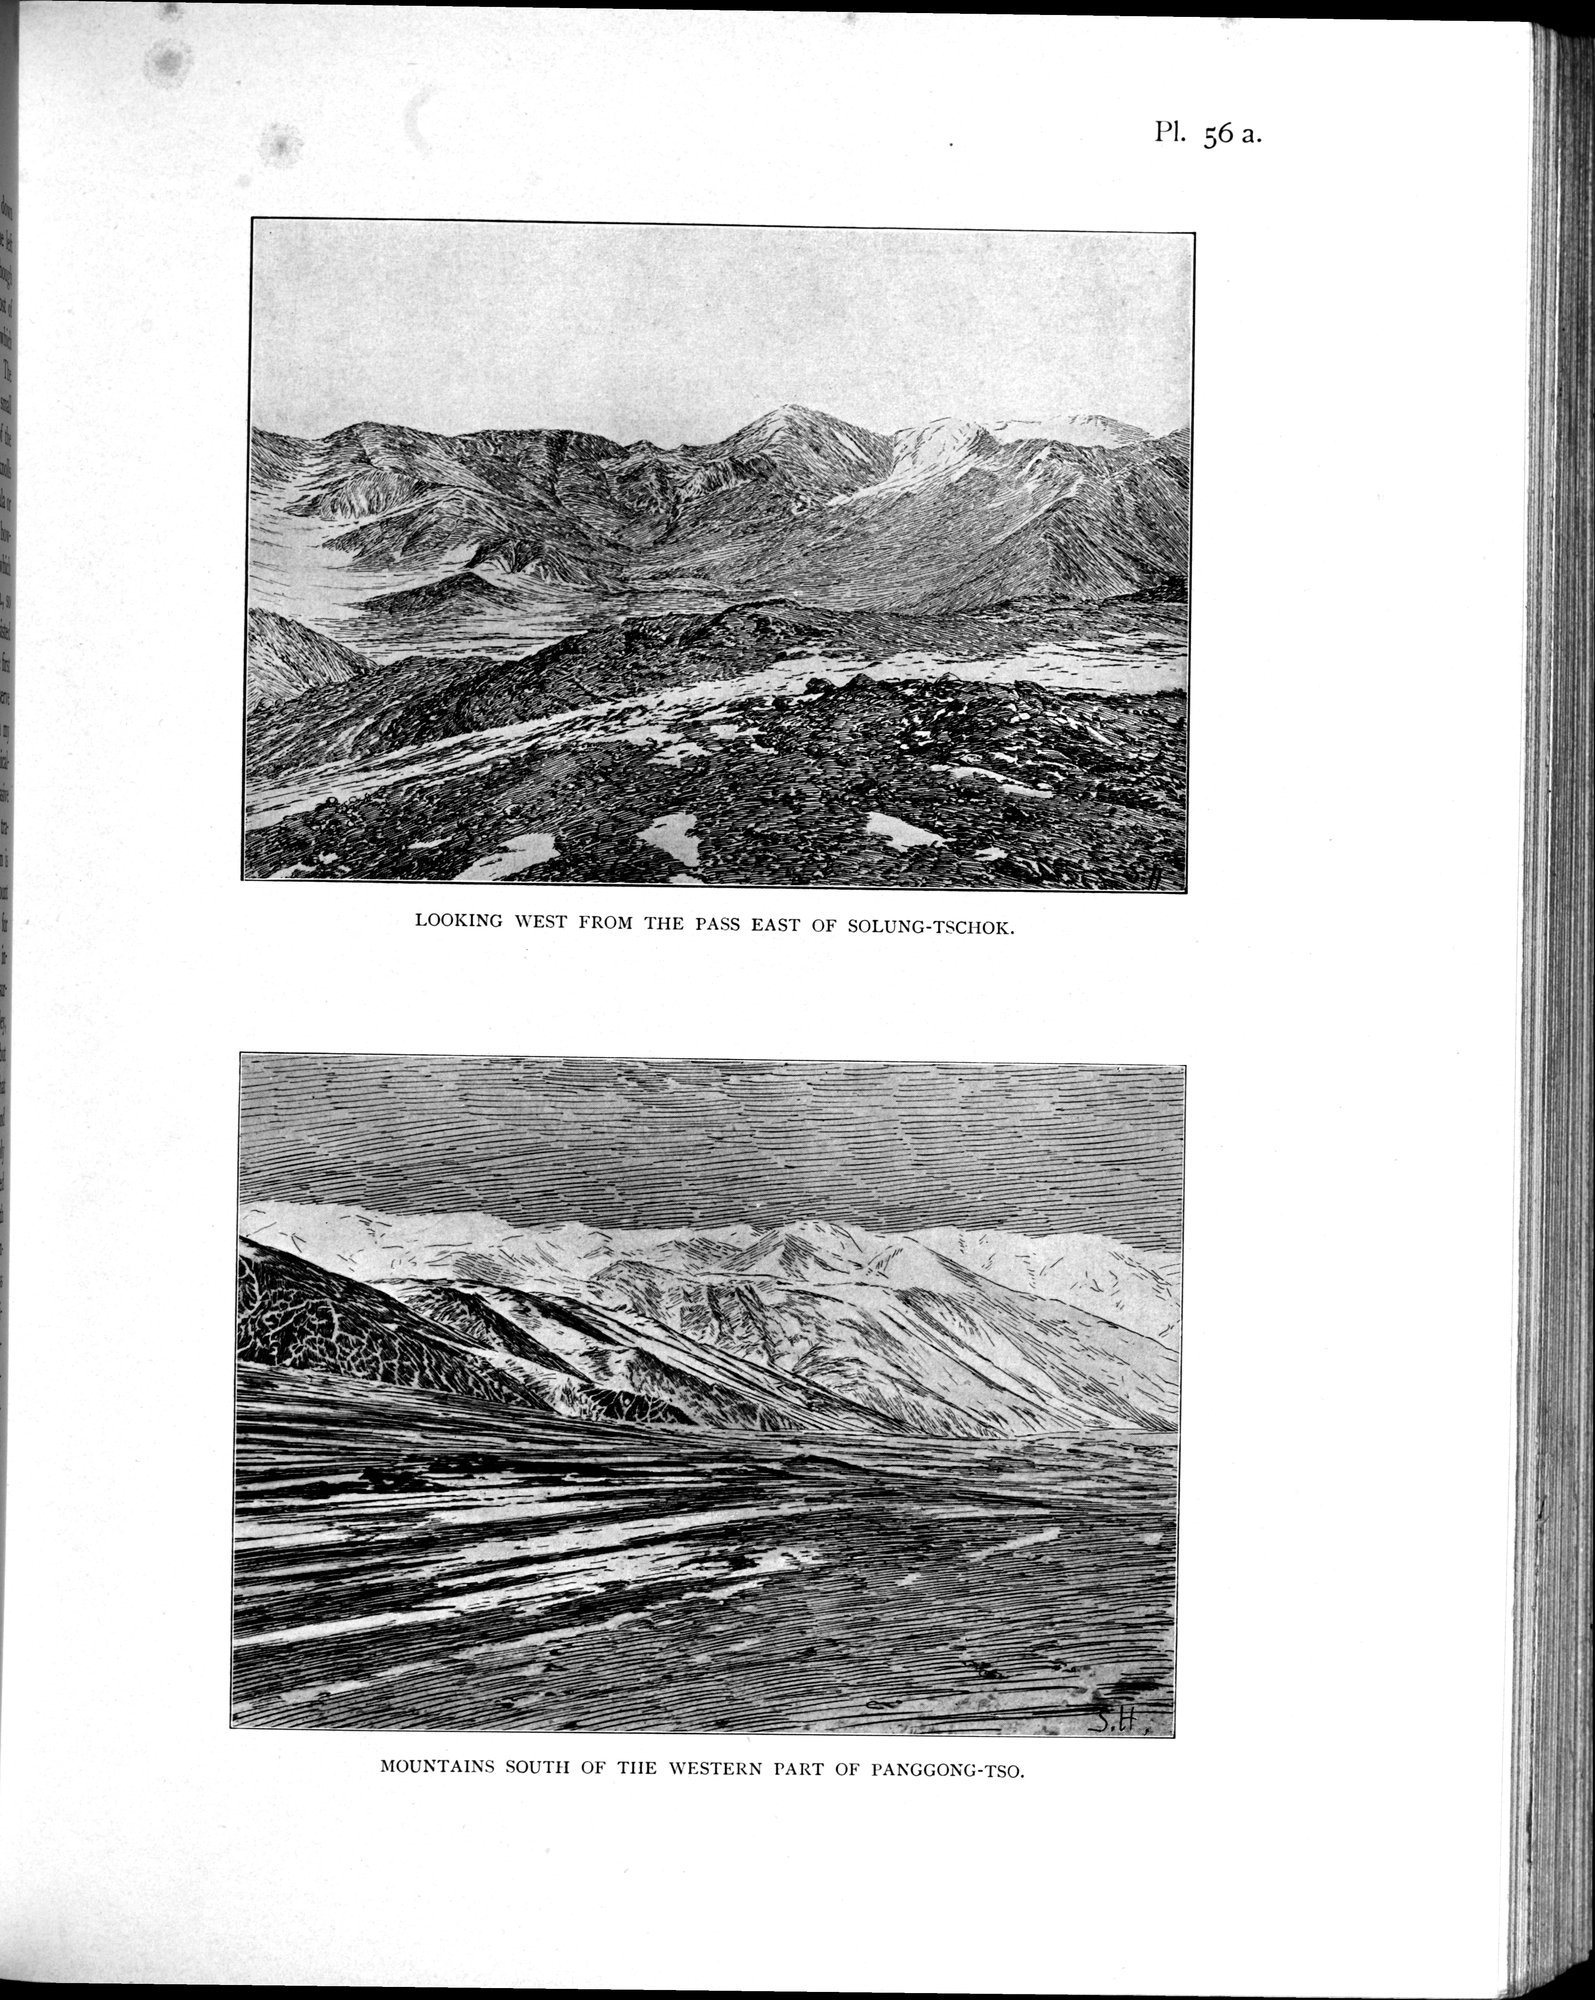 Scientific Results of a Journey in Central Asia, 1899-1902 : vol.4 / 489 ページ（白黒高解像度画像）